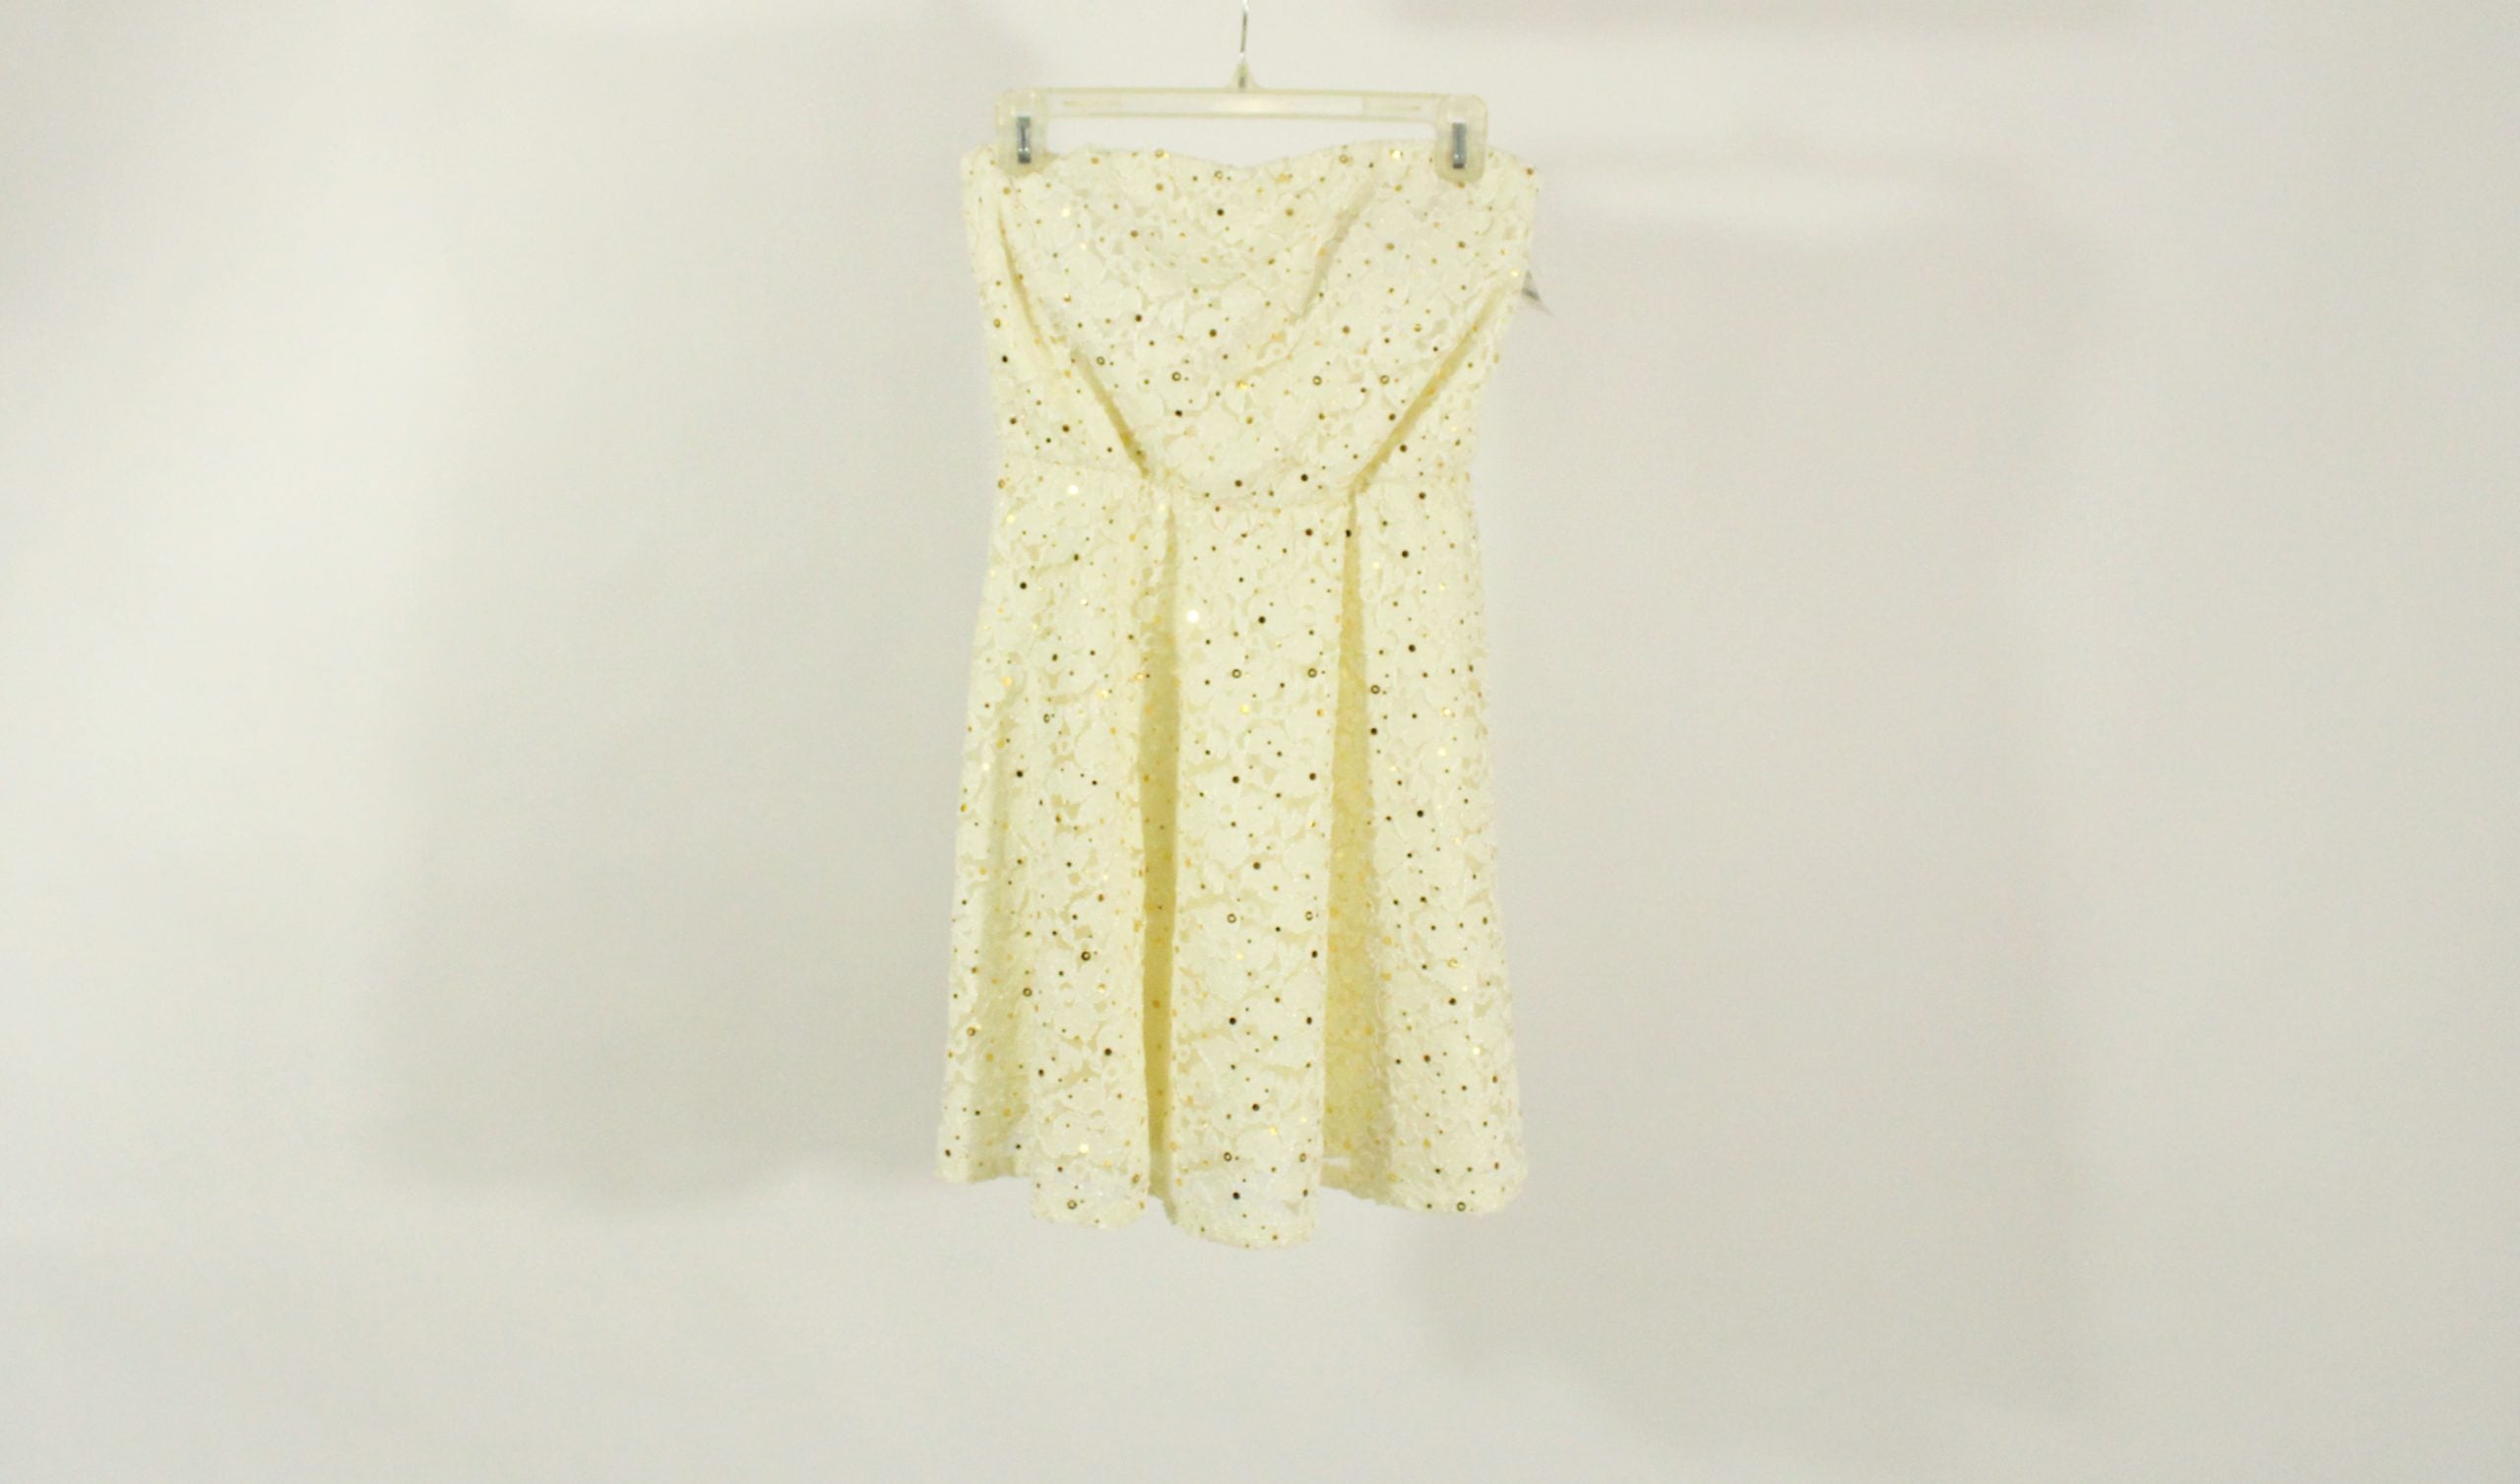 As U Wish Cream Sequined Strapless Dress | Size S